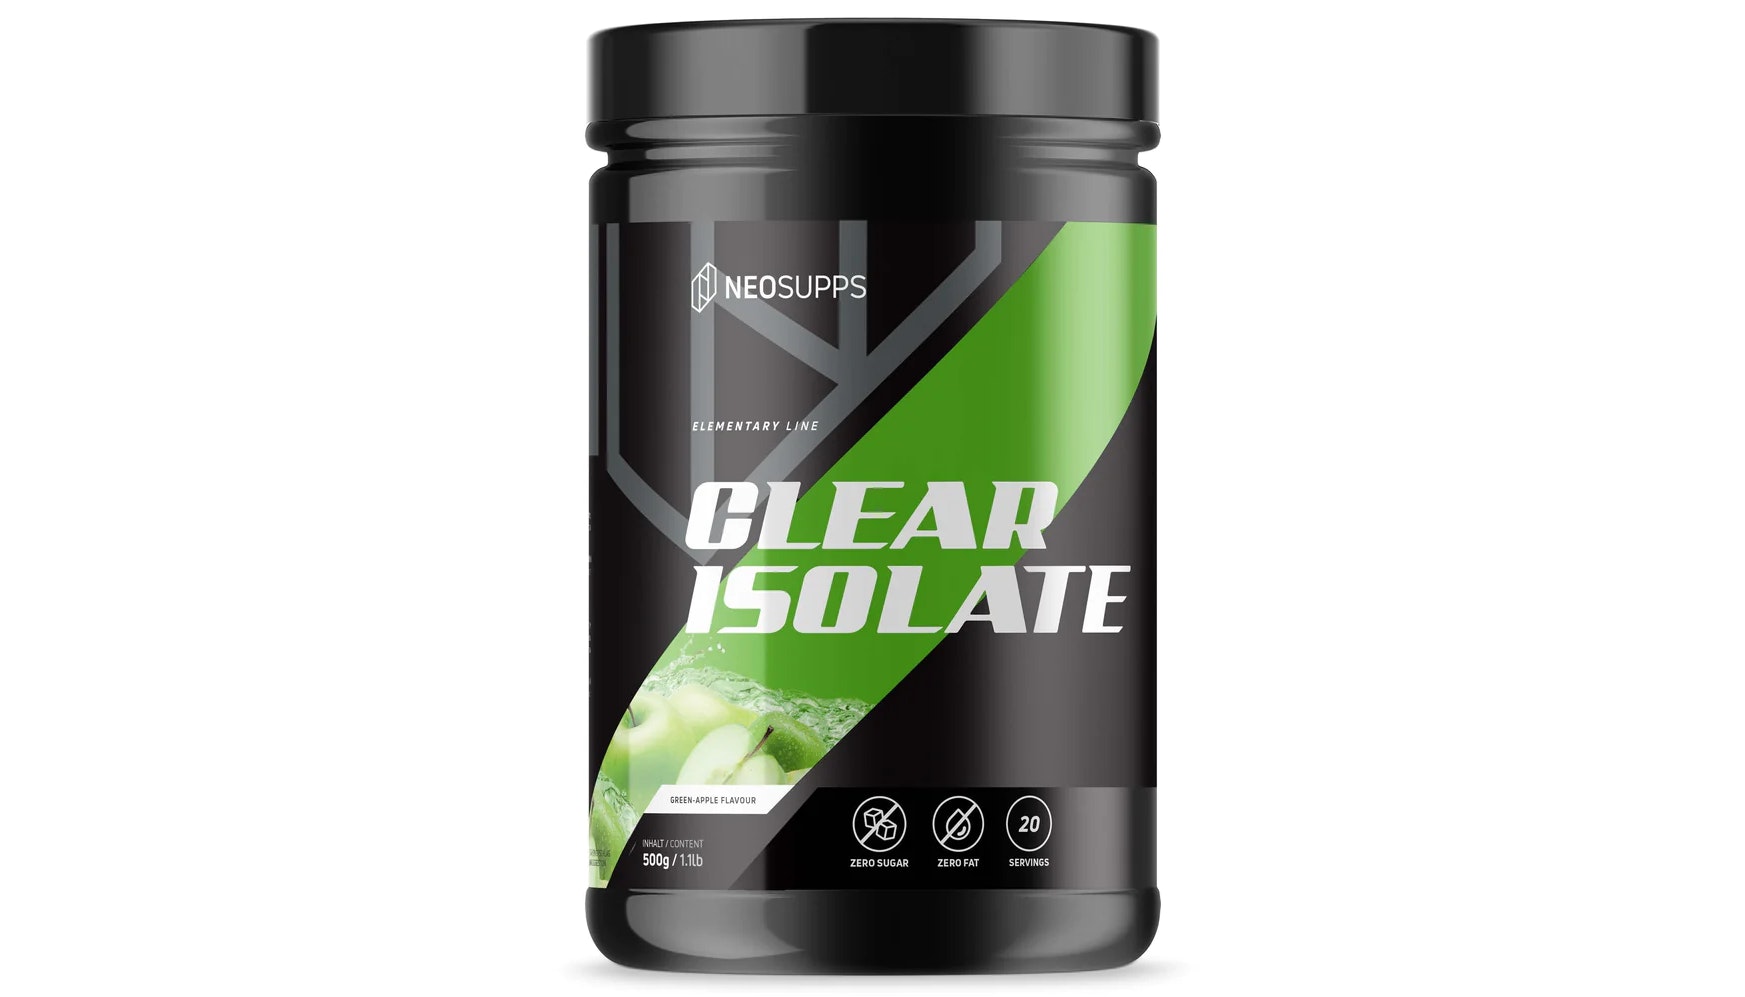 NeoSupps Clear Isolate